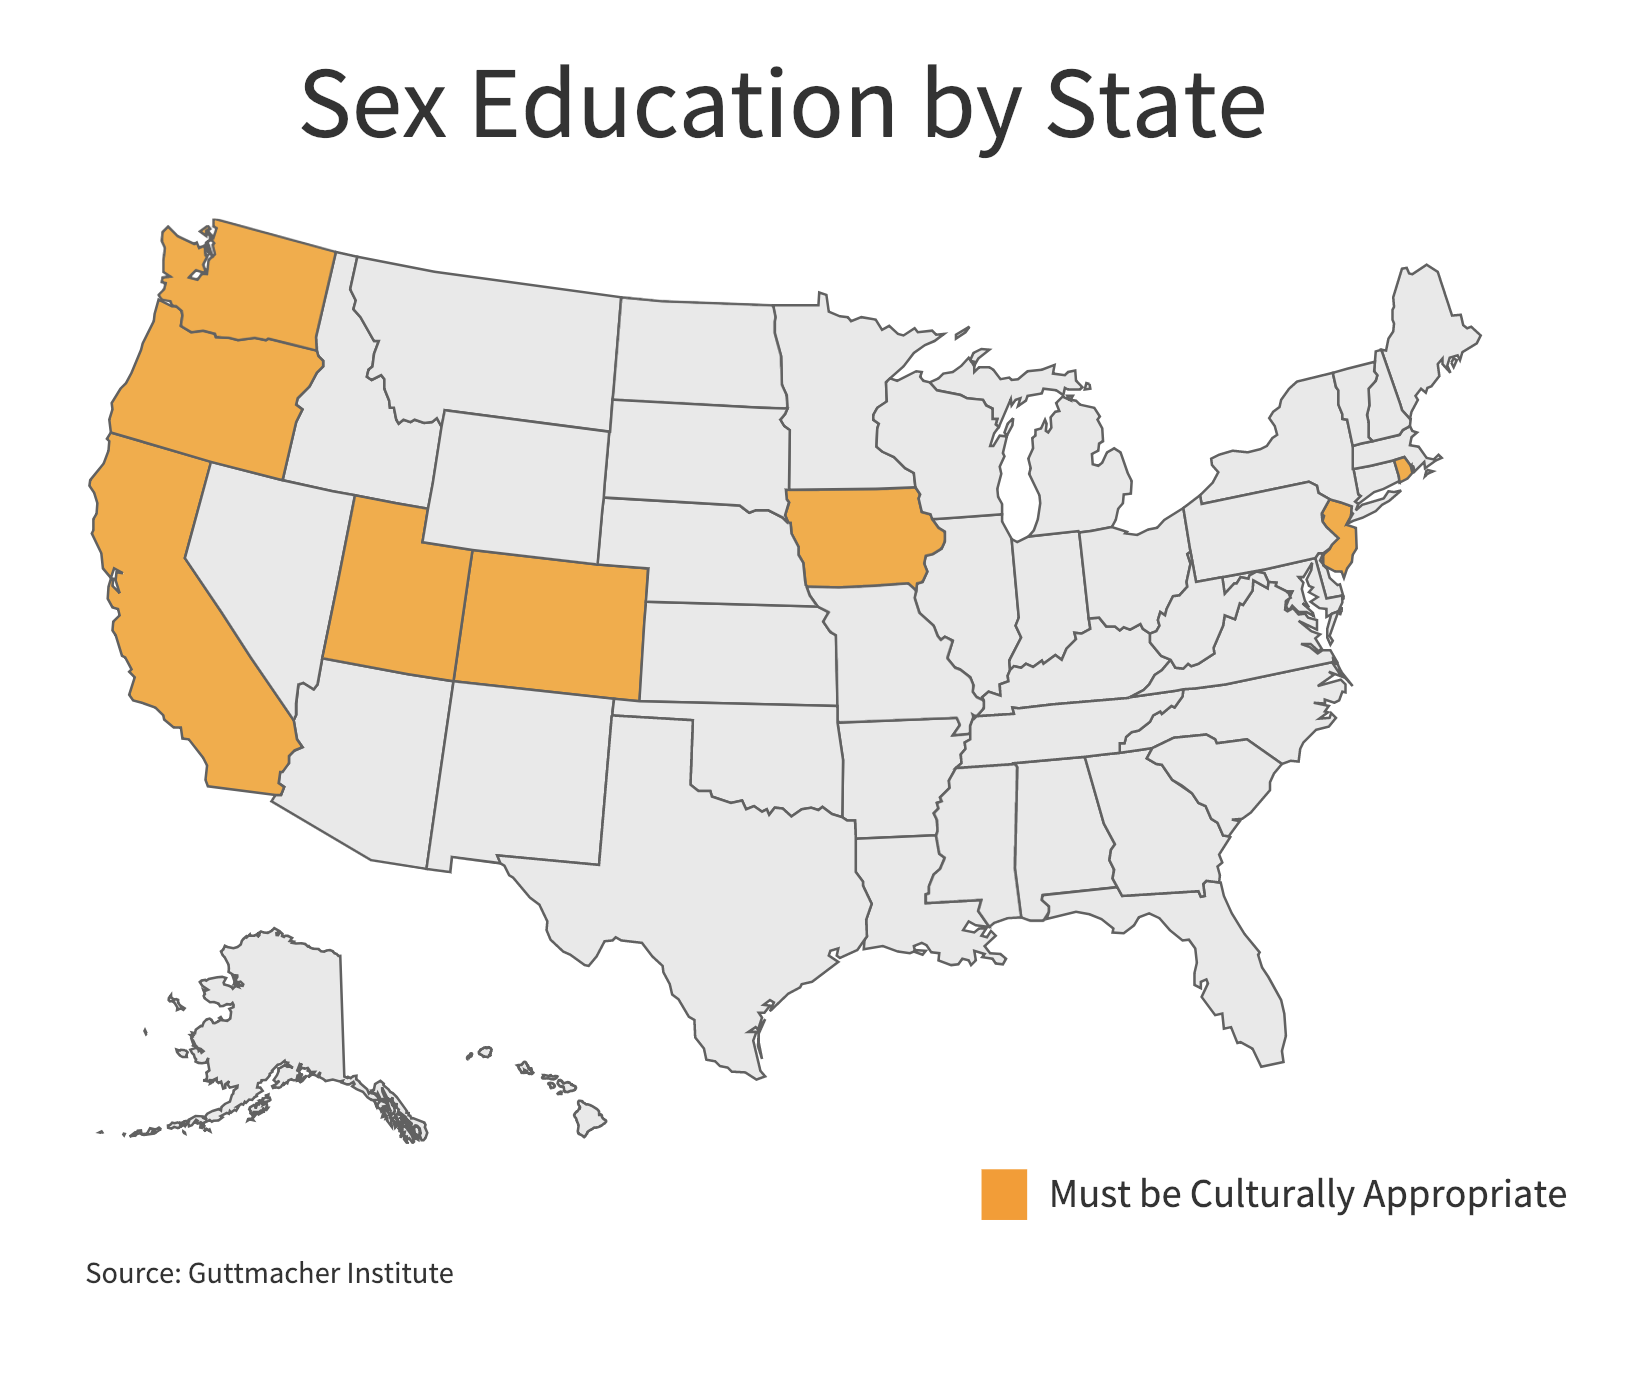 Eight states require that when sexual education is provided it be culturally appropriate and unbiased. (Charts by Ester Wells/MNS)